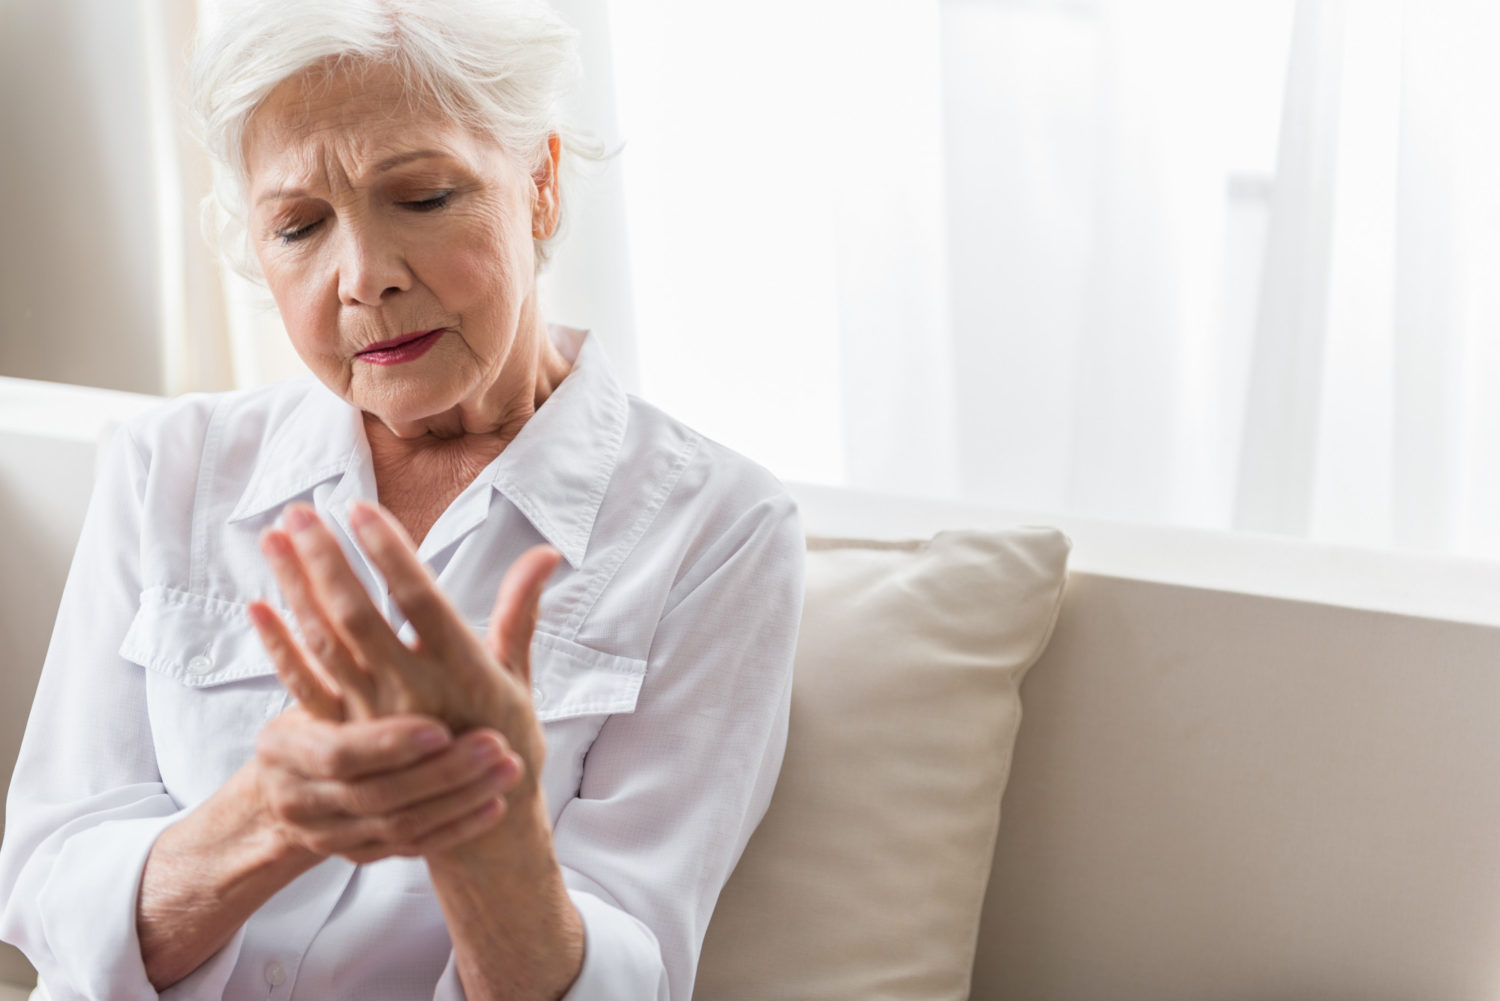 Fixing Rusty Joints: 7 Pain Management Strategies For Arthritis | Uncustomary